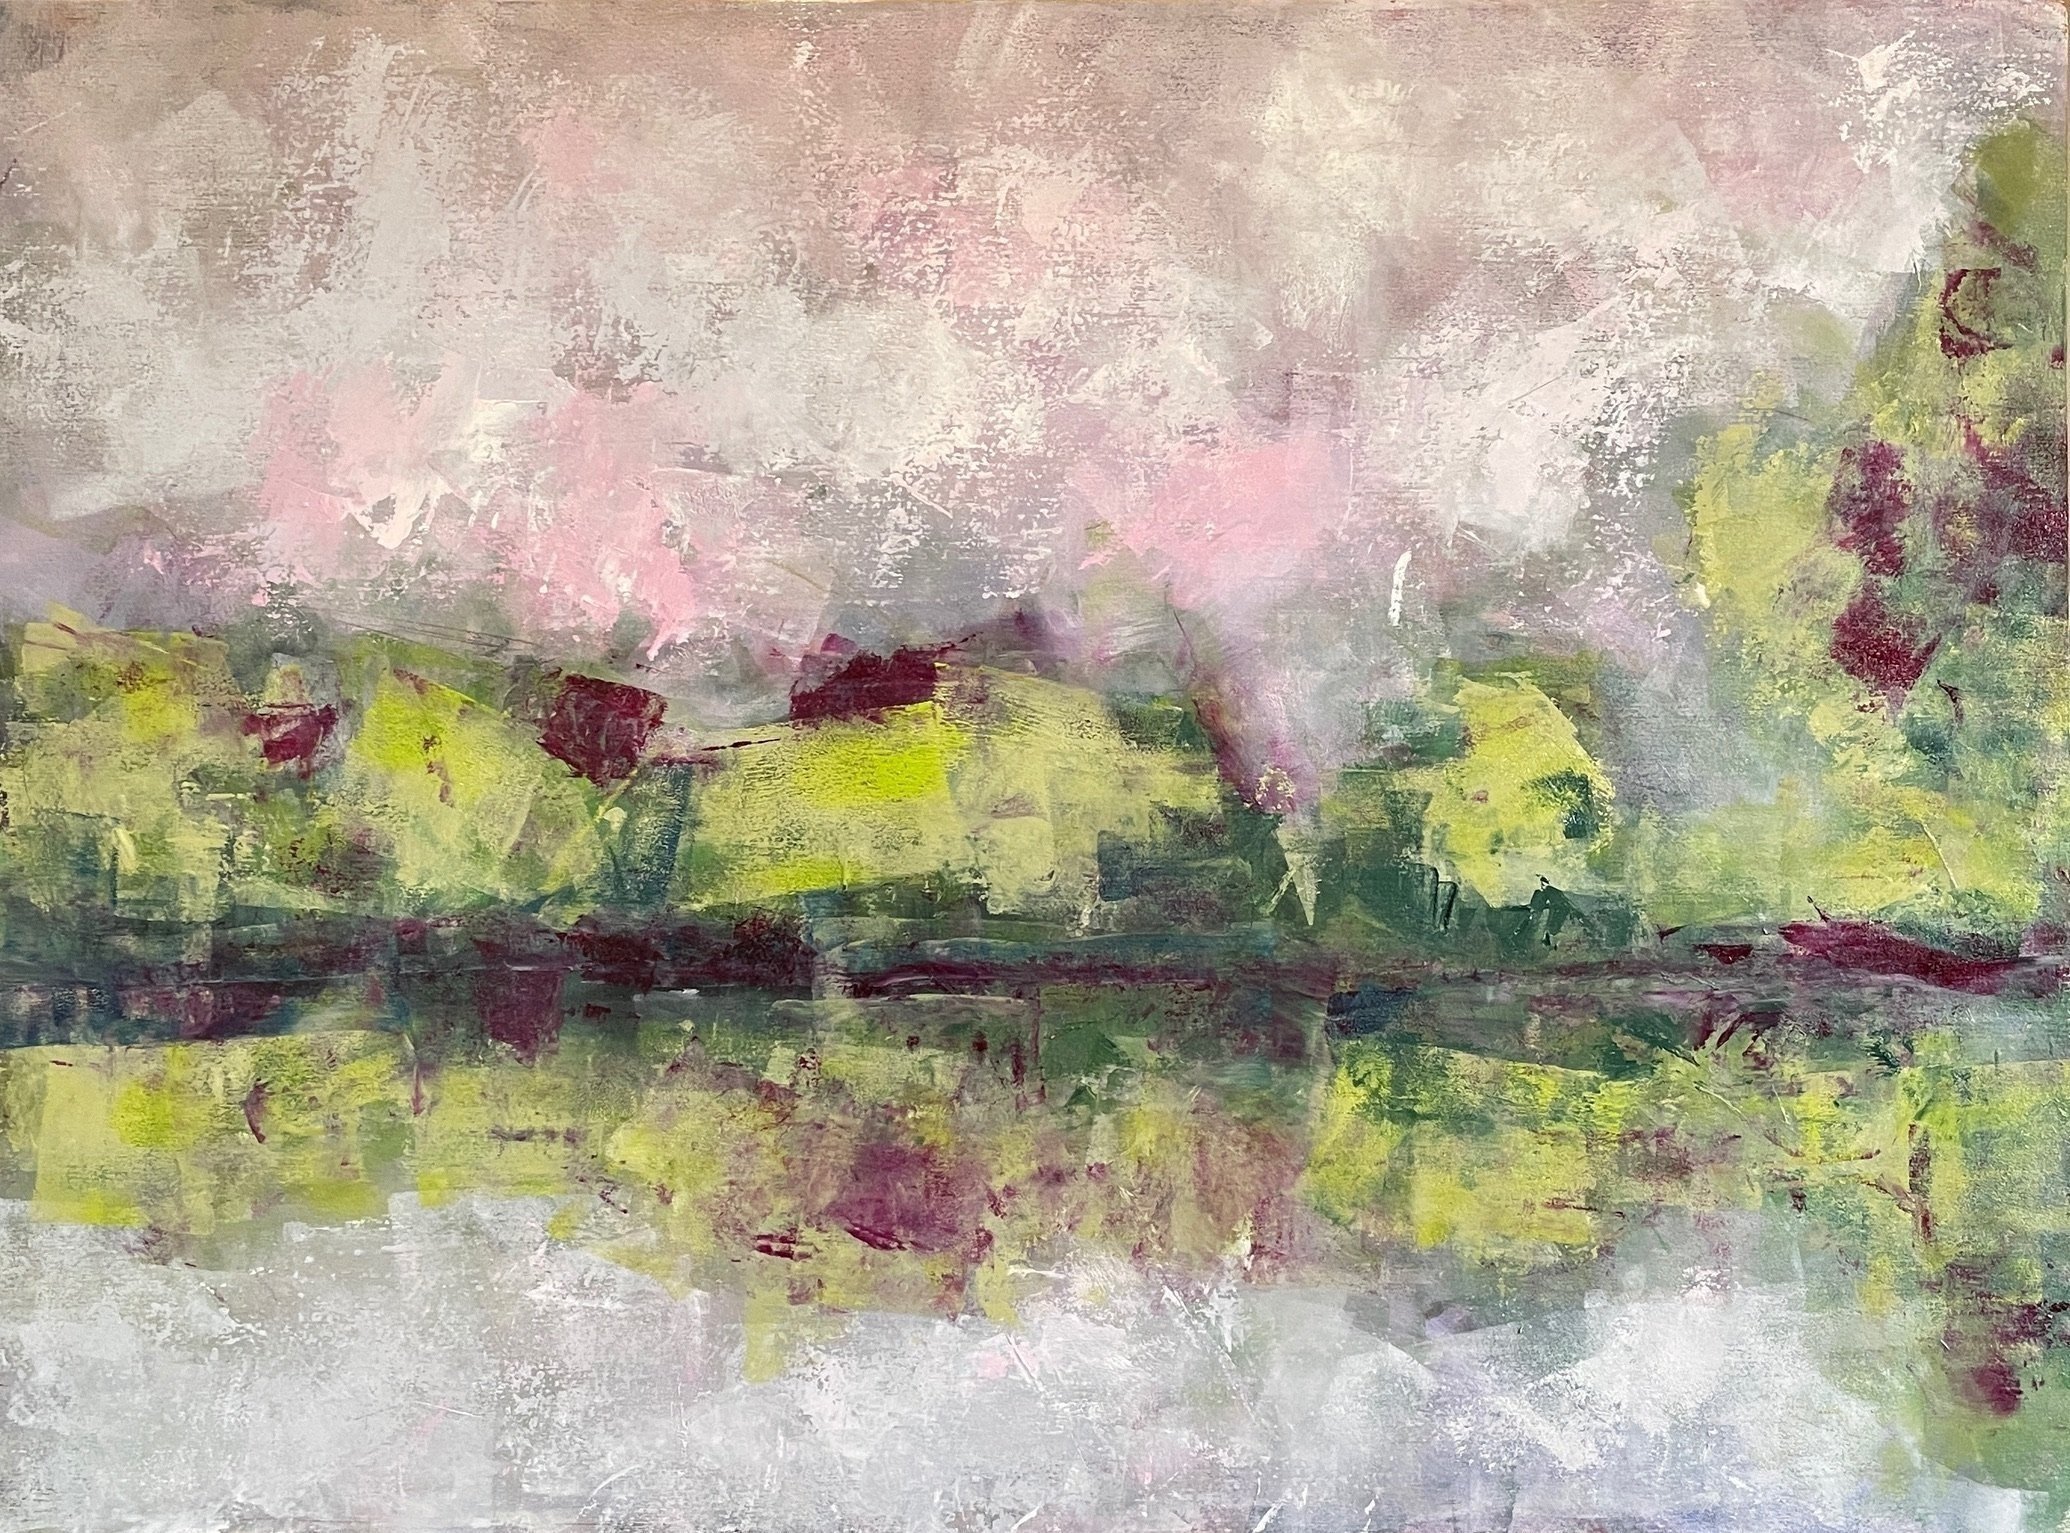 Lake Scape Spring Fog, Oil on Panel, 20 by 24 inches, 2023.